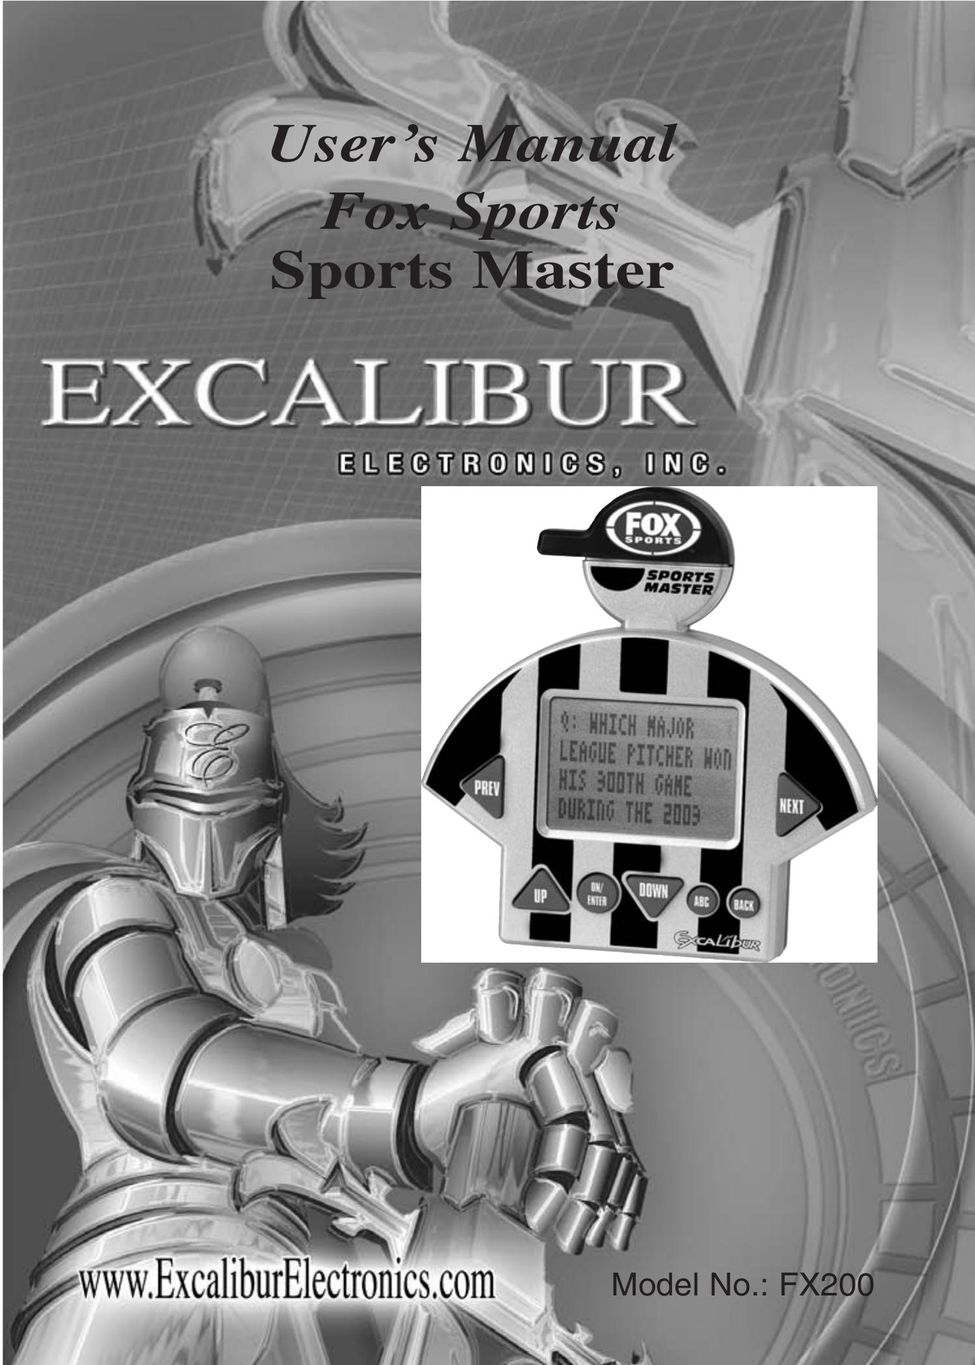 Excalibur electronic FX200 Games User Manual